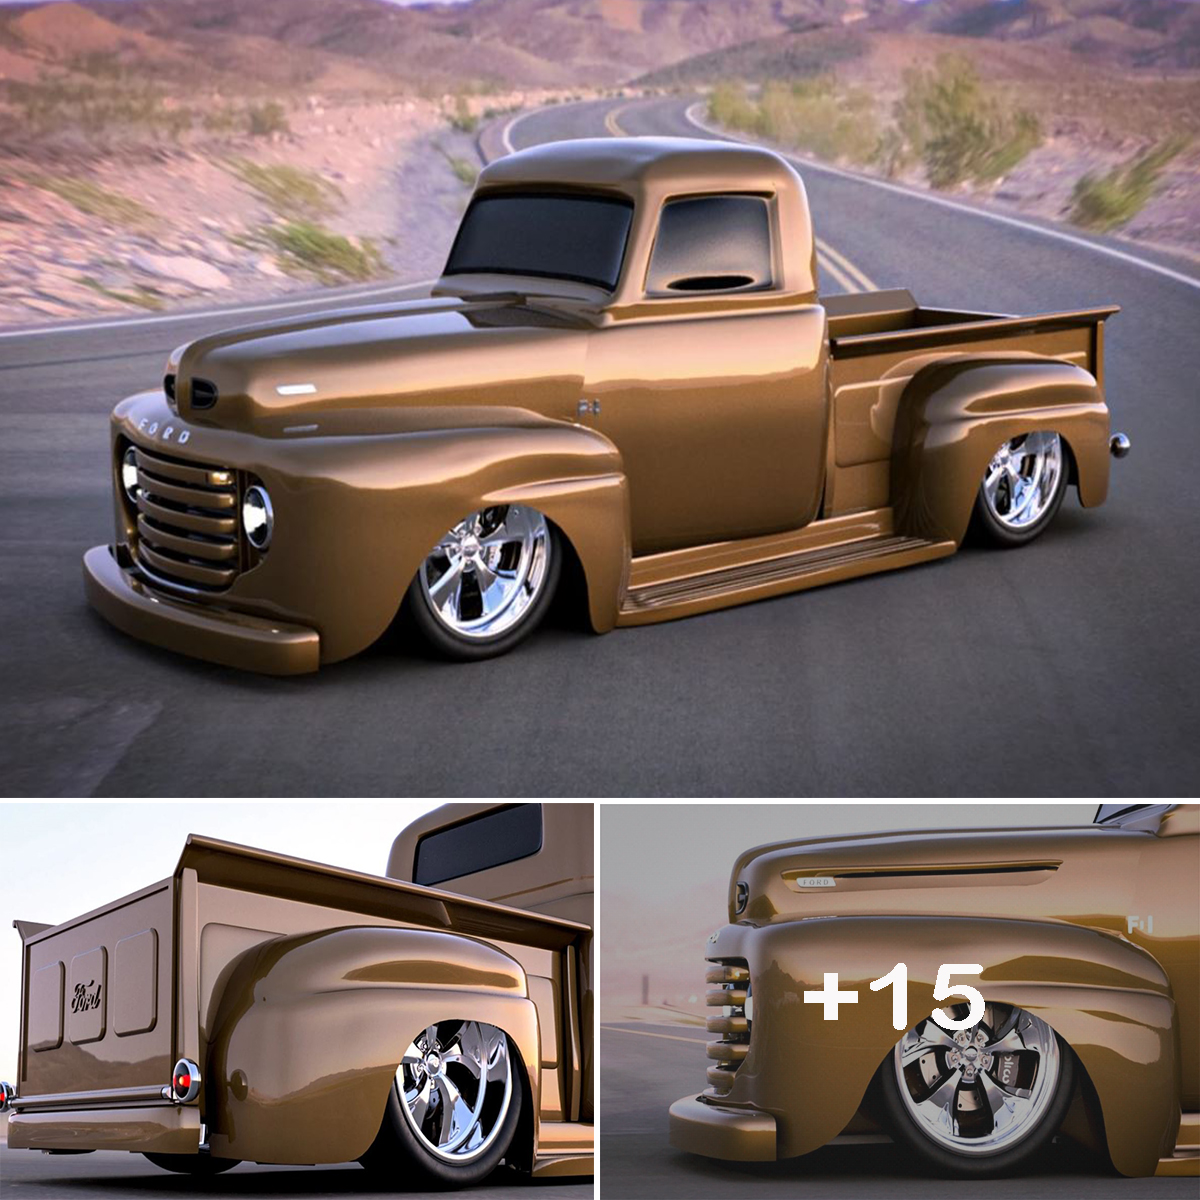 Custom Ford F1 1948 pickup truck.This is my fourth project which is a custom hotrod Ford F1 1948 .